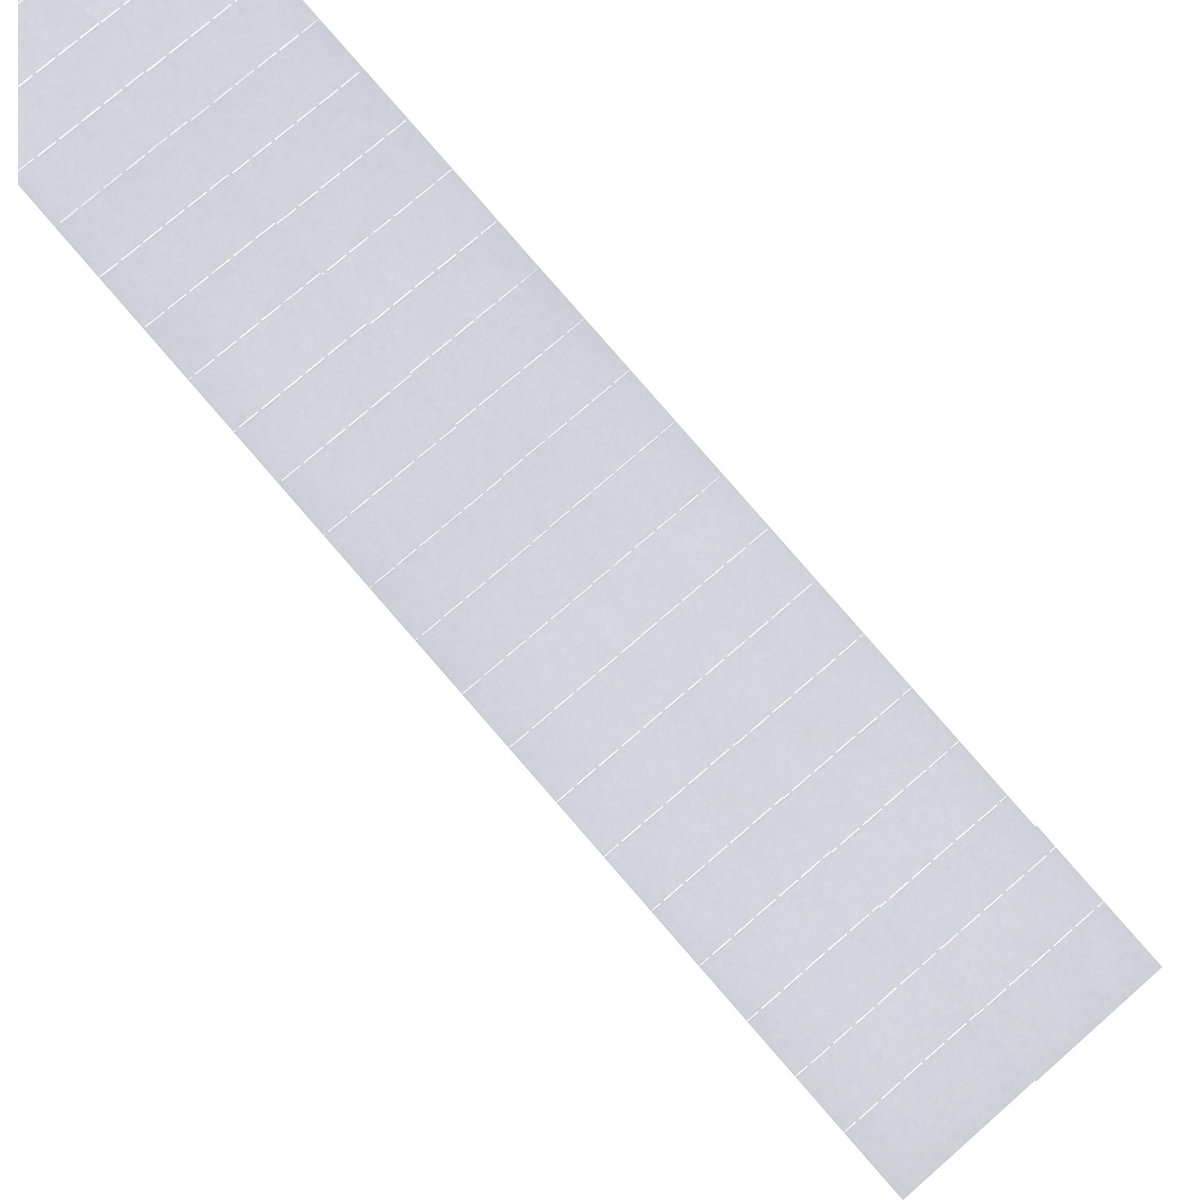 ferrocard labels – magnetoplan, HxW 15 x 40 mm, pack of 345, white-4